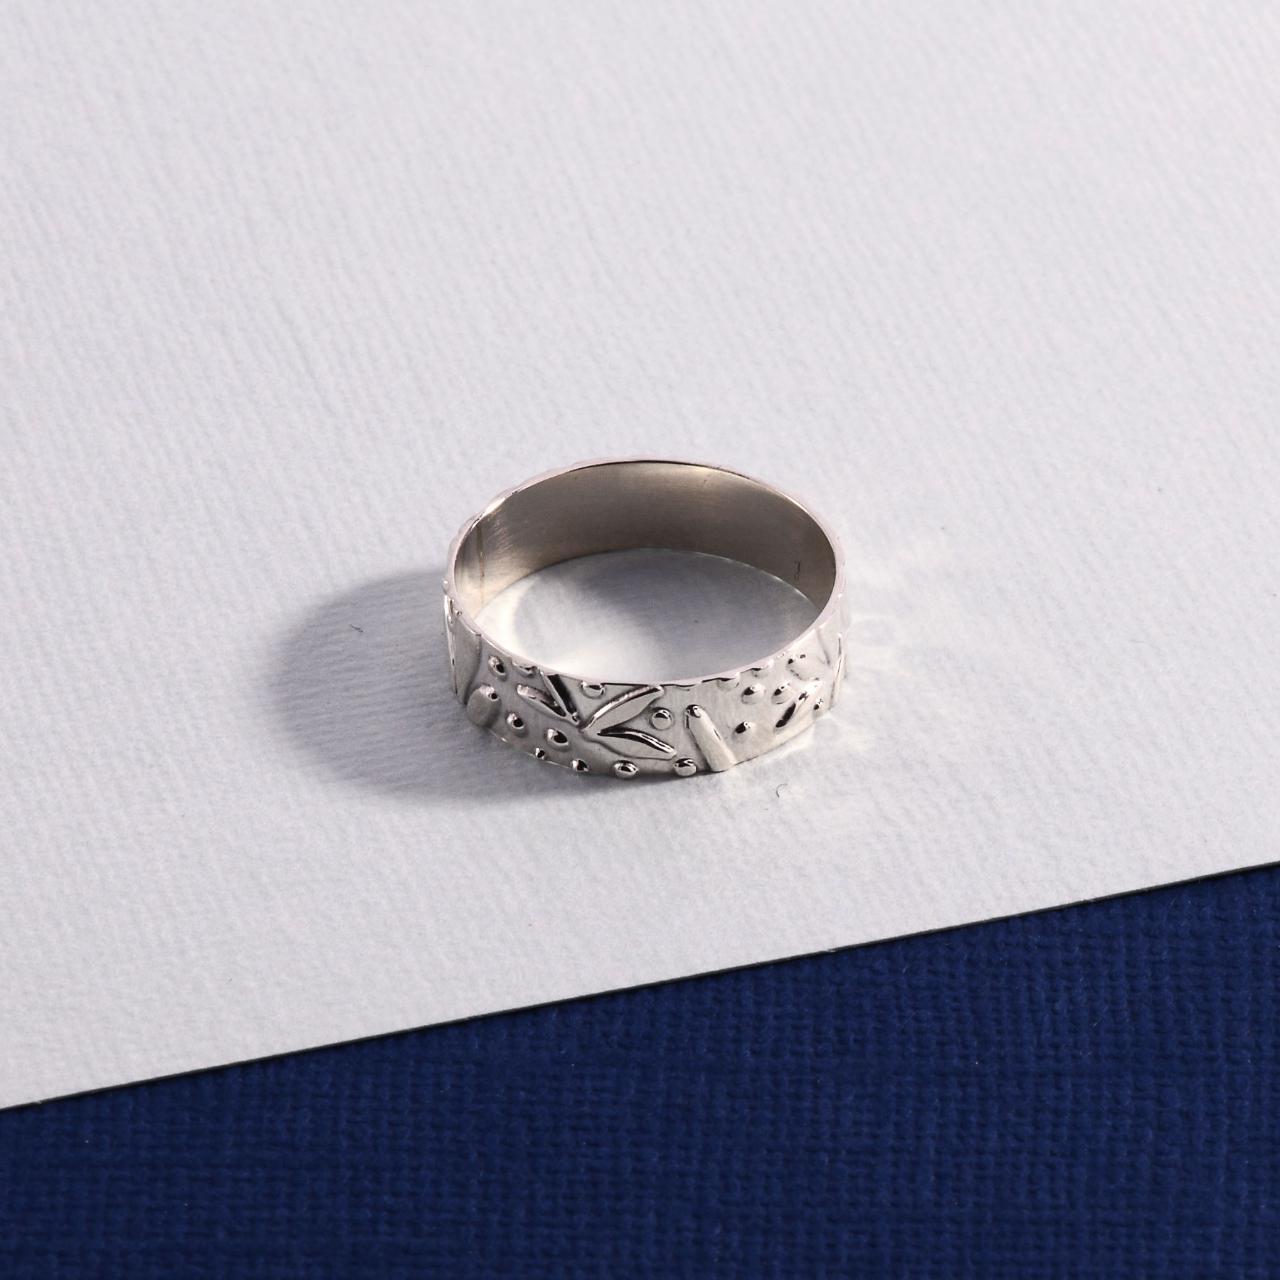 Product Image 2 - Sterling Silver Ring

Size 6

925 Symbol